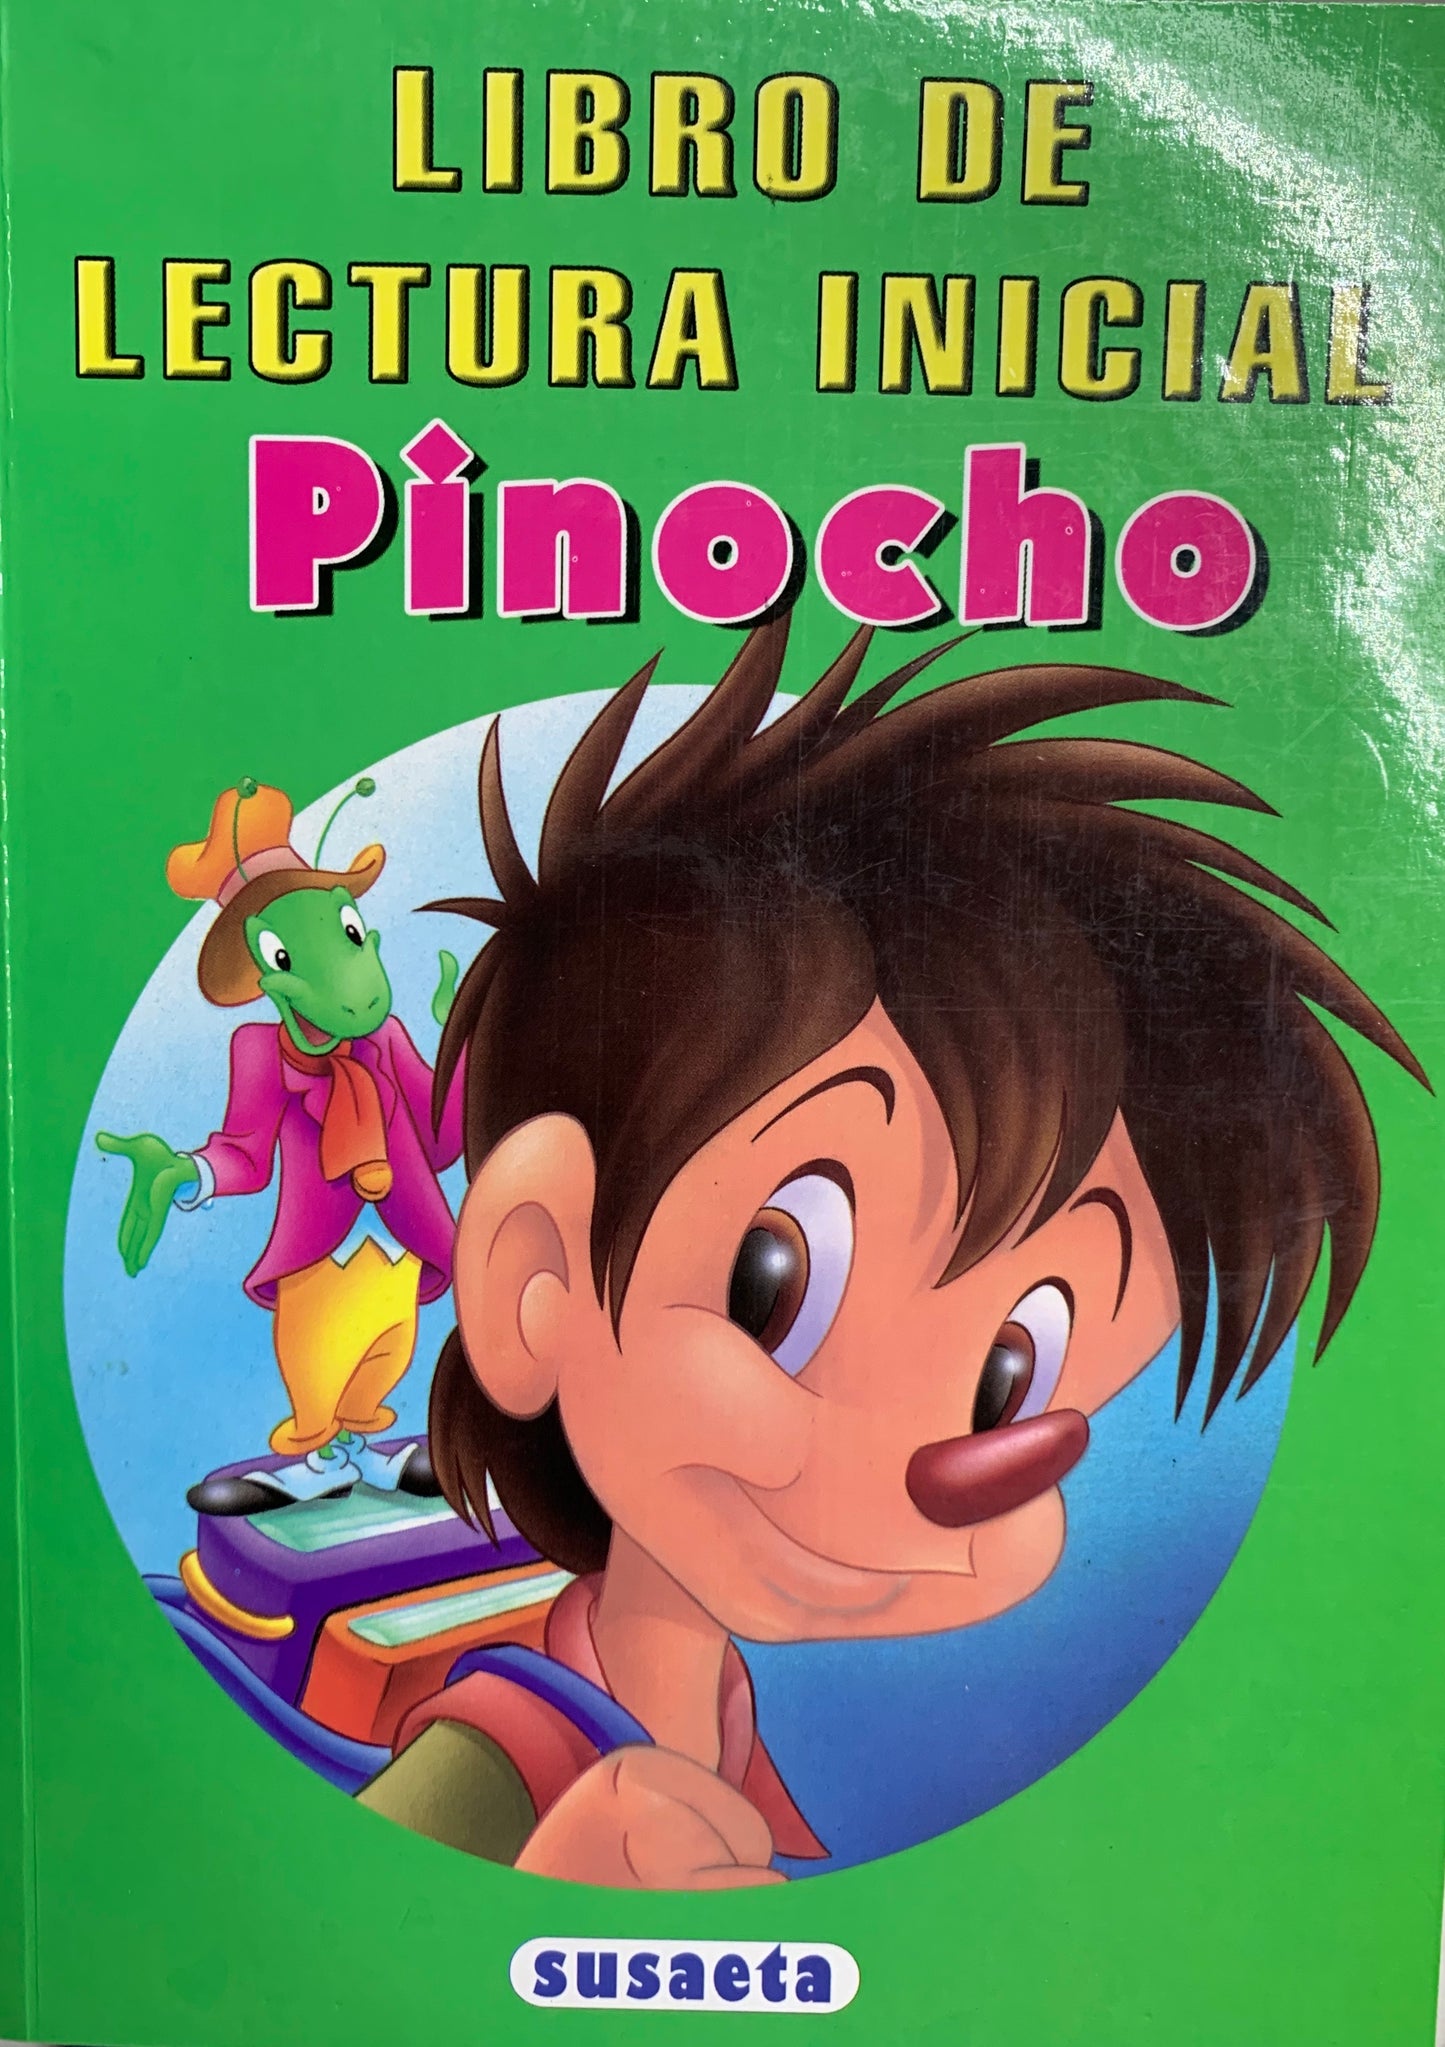 Booklet Pinocho Lectura Inicial